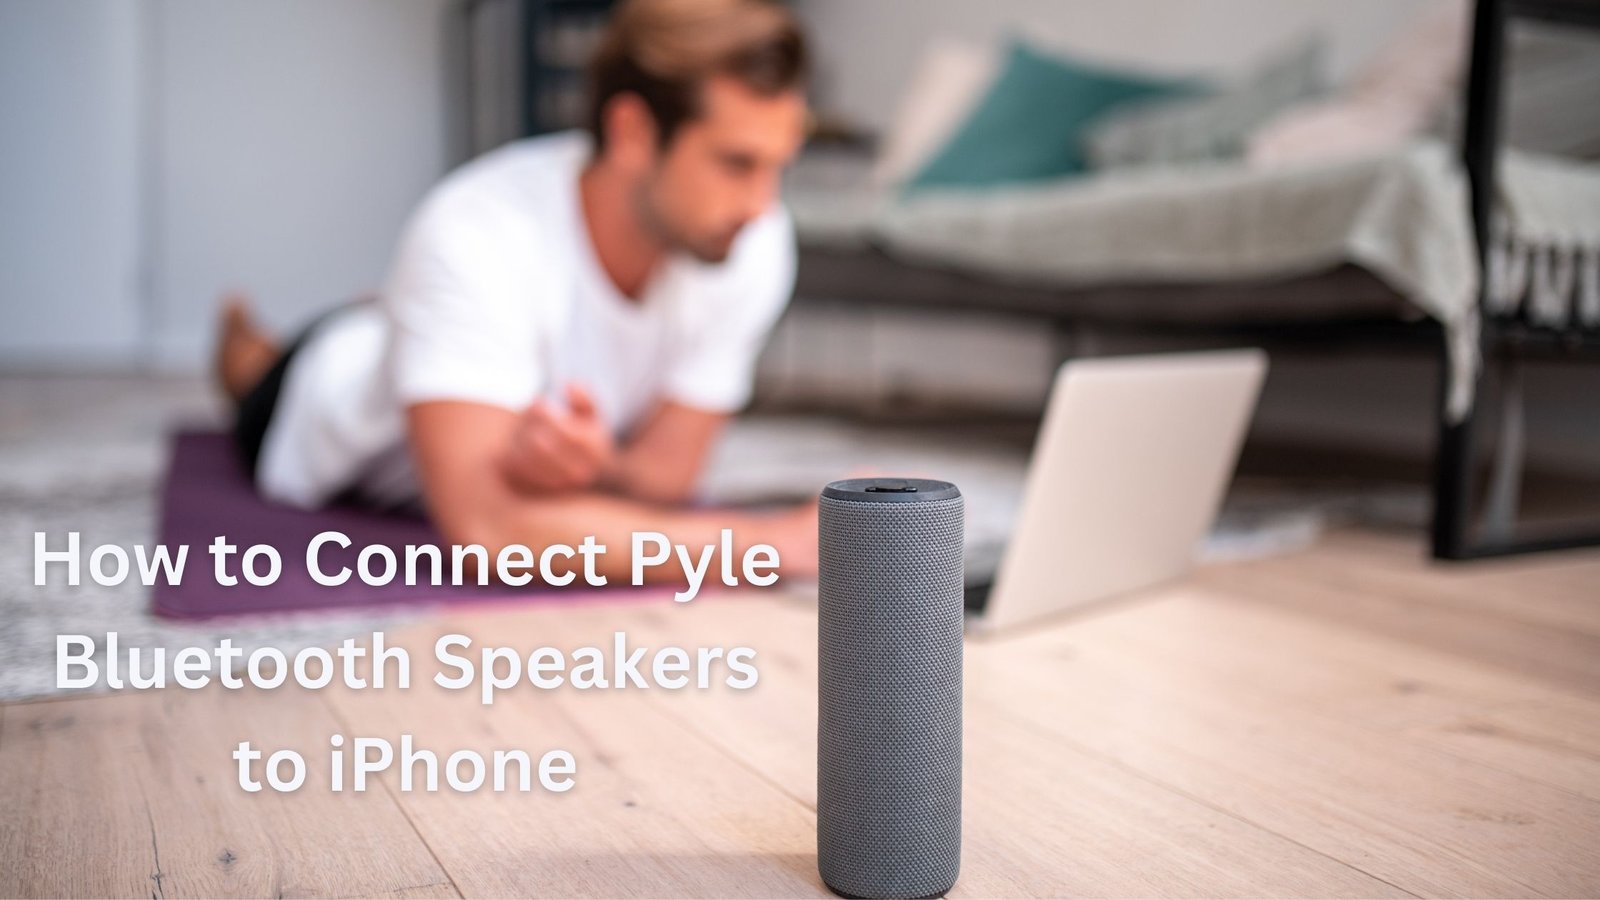 How to Connect Pyle Bluetooth Speakers to iPhone